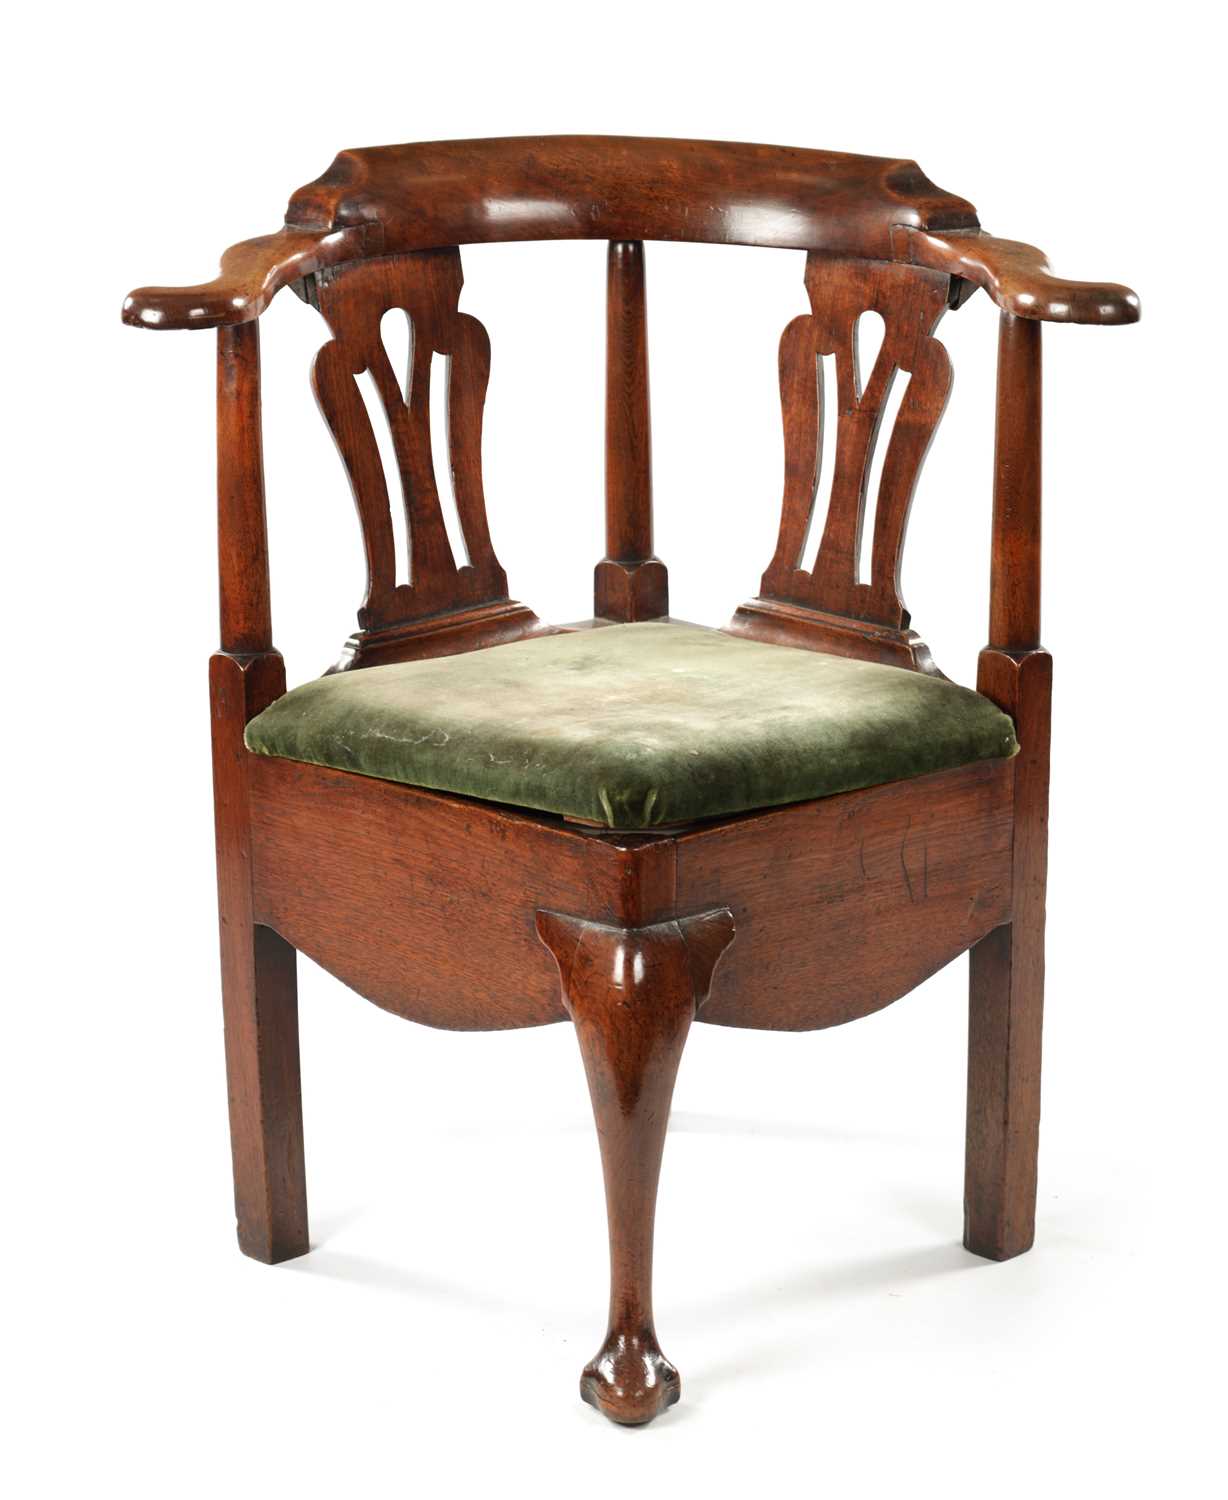 A MID 18TH CENTURY WALNUT CORNER COMMODE CHAIR OF FINE COLOUR AND PATINA